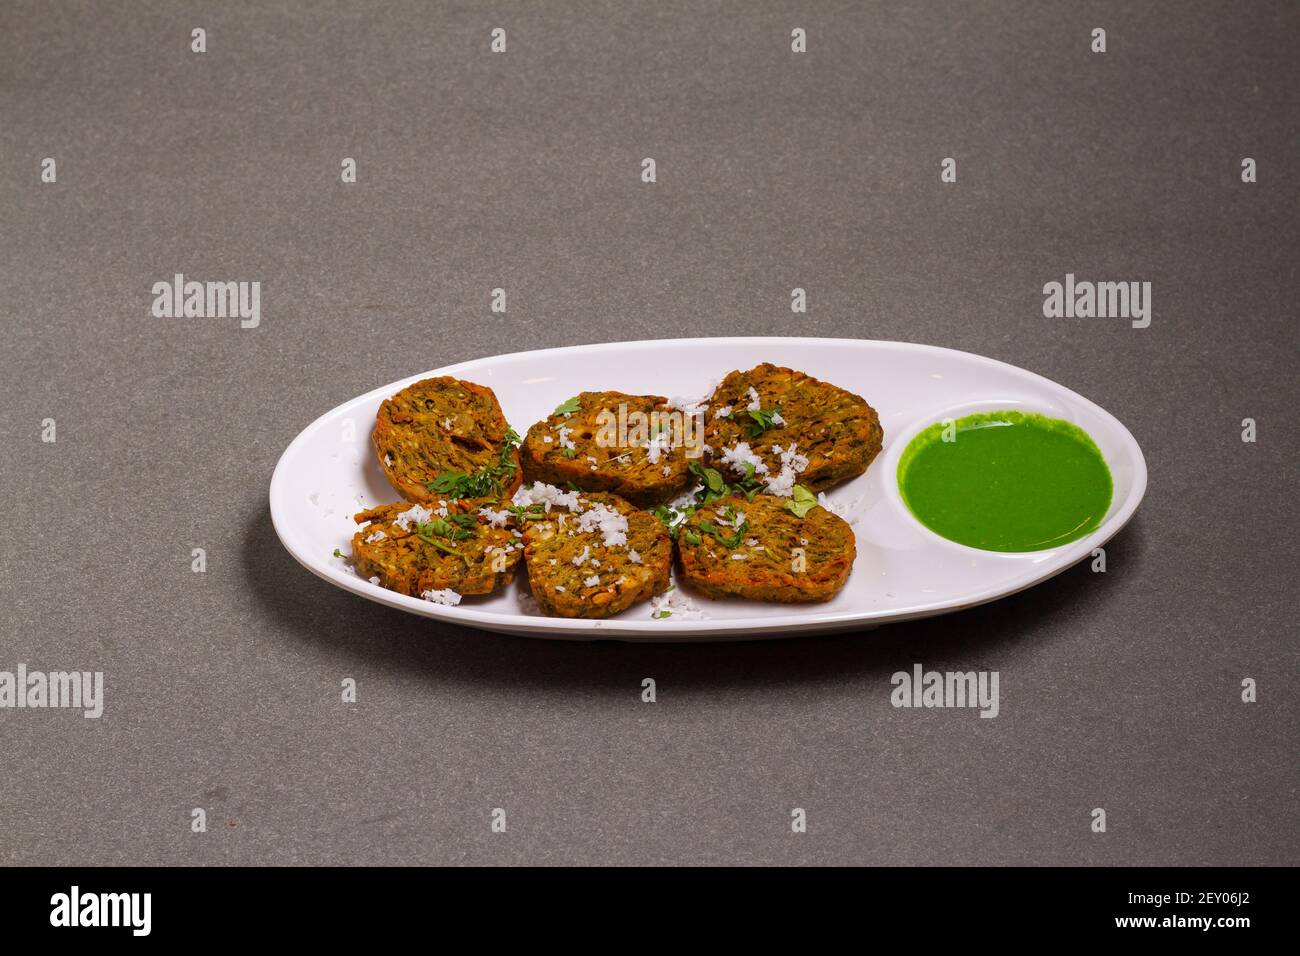 Cilantro cake or Kothimbir Vadi is a popular Maharashtrian cuisine made with cilantro leaves. served with tomato ketchup. selective focus Stock Photo